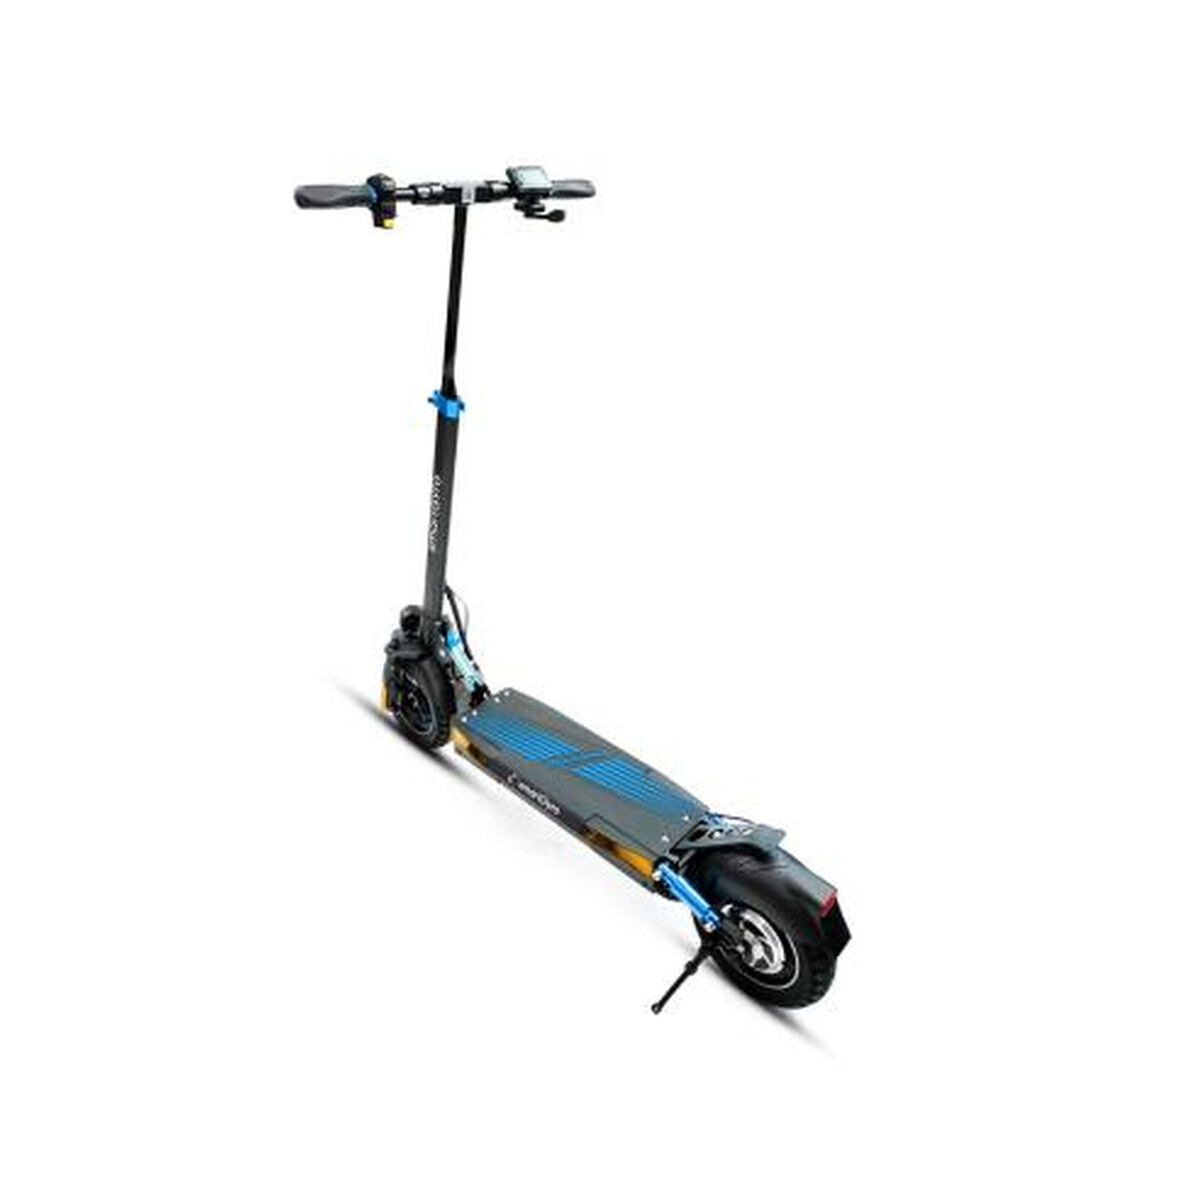 Electric Scooter Smartgyro Black 500 W 48 V, Smartgyro, Sports and outdoors, Urban mobility, electric-scooter-smartgyro-black-500-w-48-v, Brand_Smartgyro, category-reference-2609, category-reference-2629, category-reference-2904, category-reference-t-19681, category-reference-t-19756, category-reference-t-19876, category-reference-t-21245, category-reference-t-25387, Condition_NEW, deportista / en forma, Price_600 - 700, RiotNook